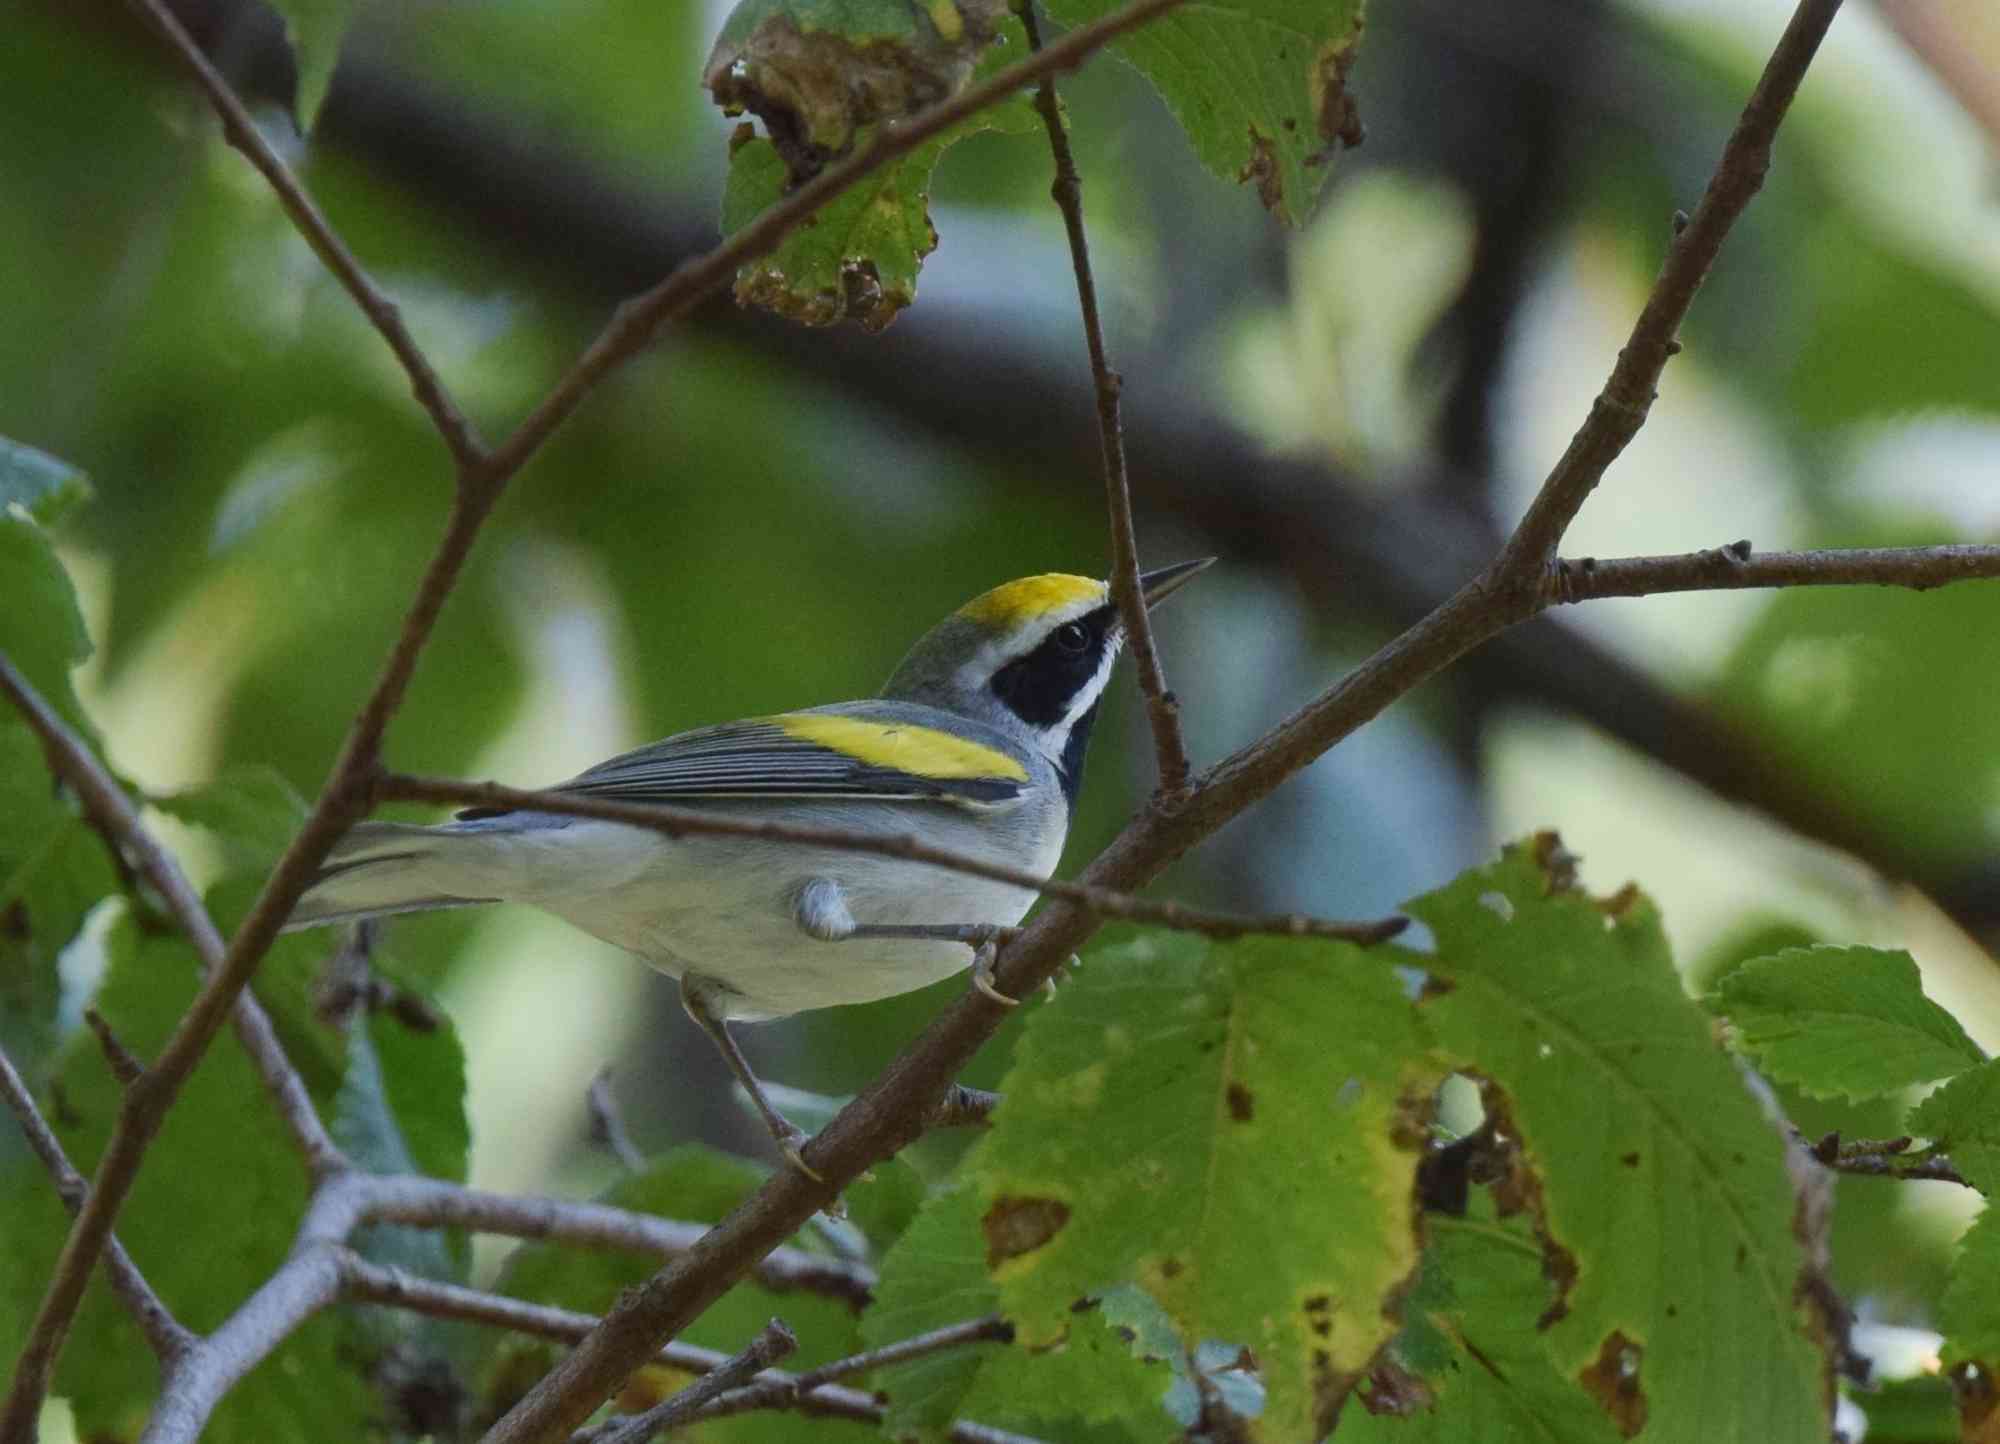 Golden-Winged Warbler on a branch